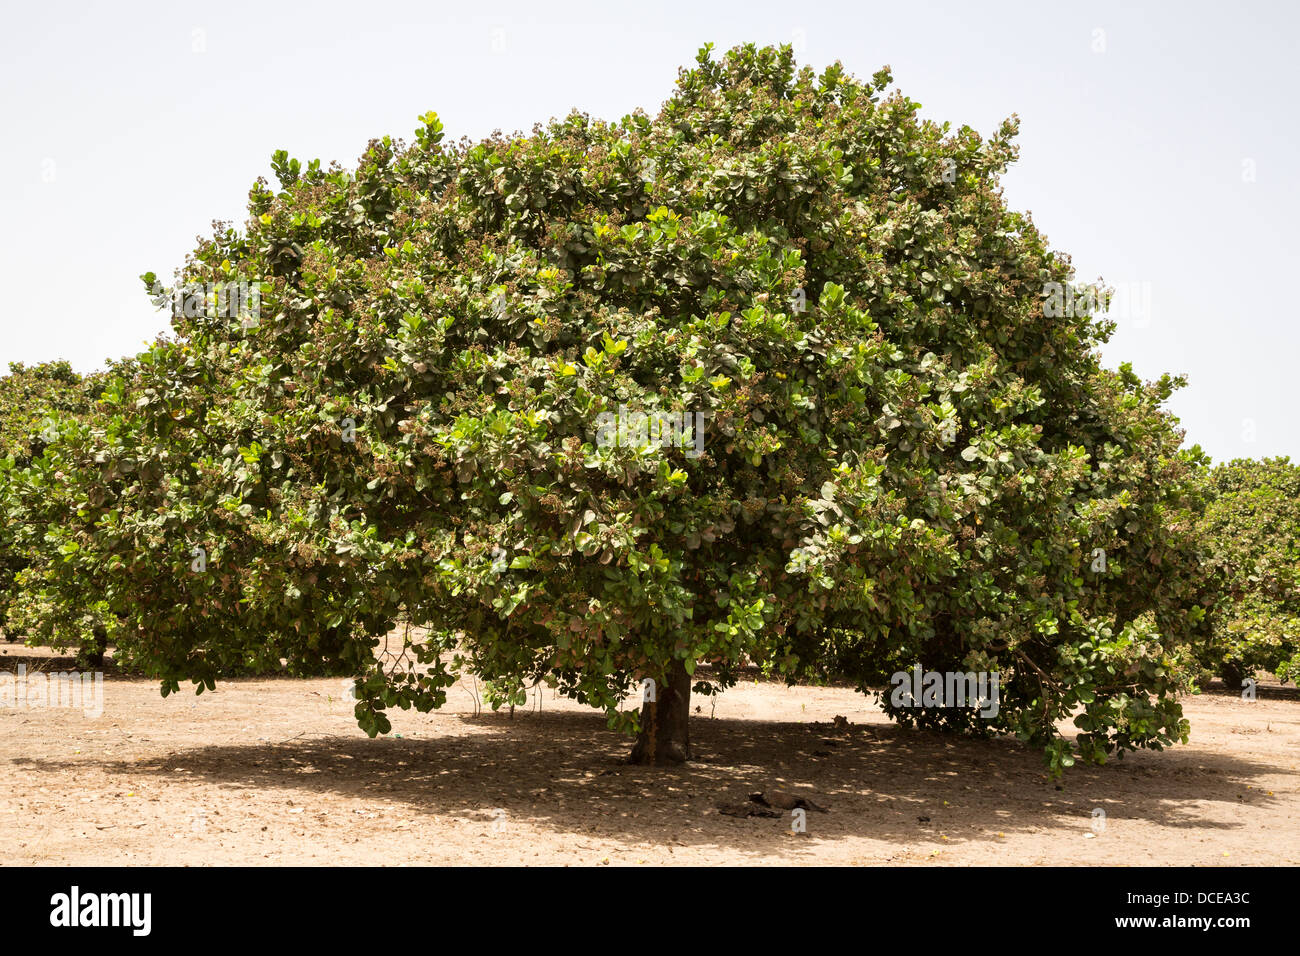 Cashew Nut Trees, near Sokone, Senegal. The field is well-tended, with no brush or low-lying branches under the trees. Stock Photo